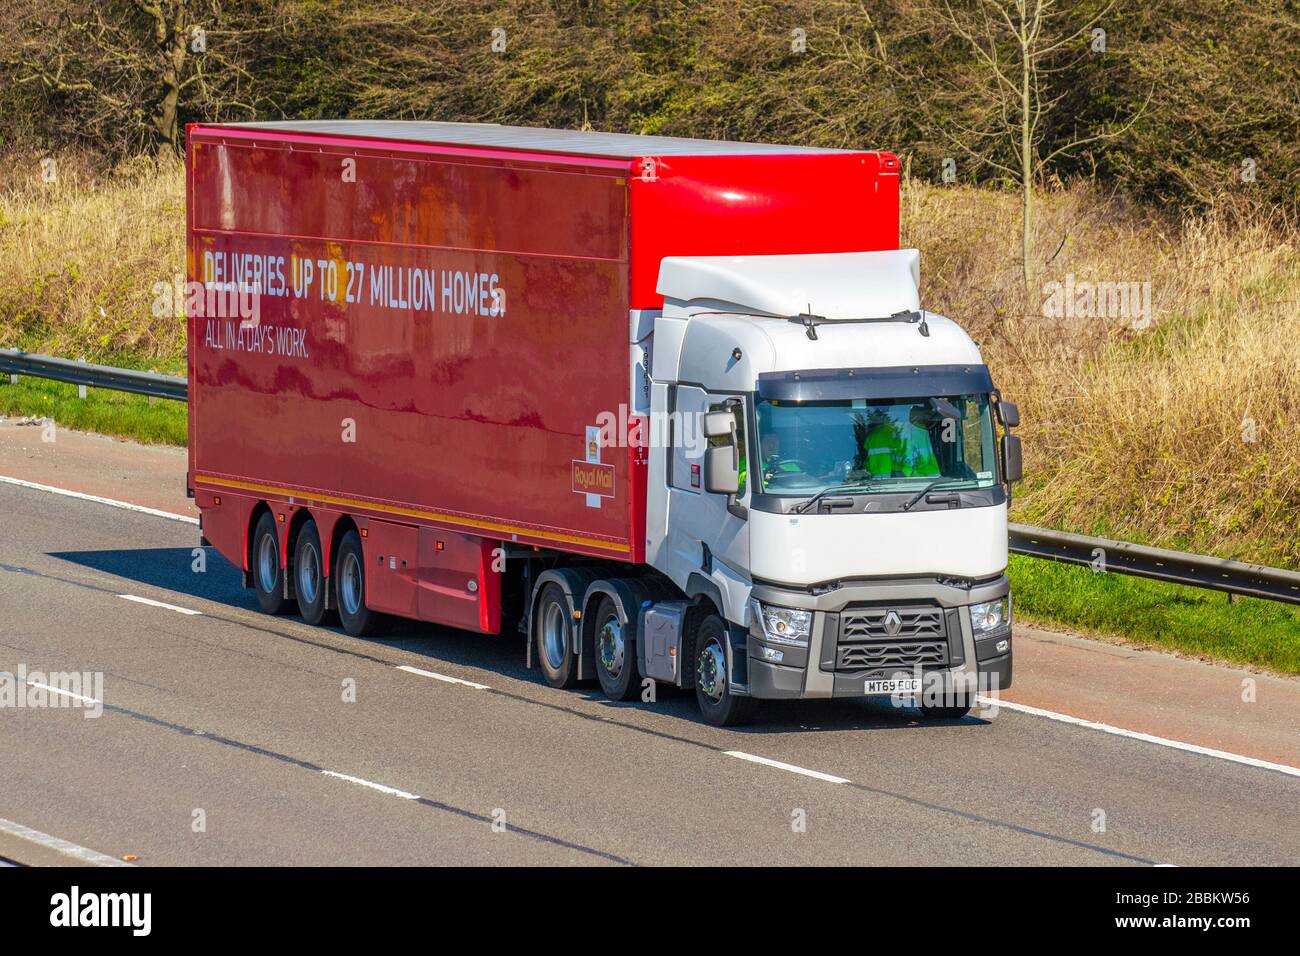 Red Royal Mail Post Office Transport Delivery 2019 Renault Trucks T (T) Trucks, LKWs, Transport, Truck, Cargo Carrier, Vehicle, European Commercial Transport, Industry, M61 at Manchester, UK Stockfoto